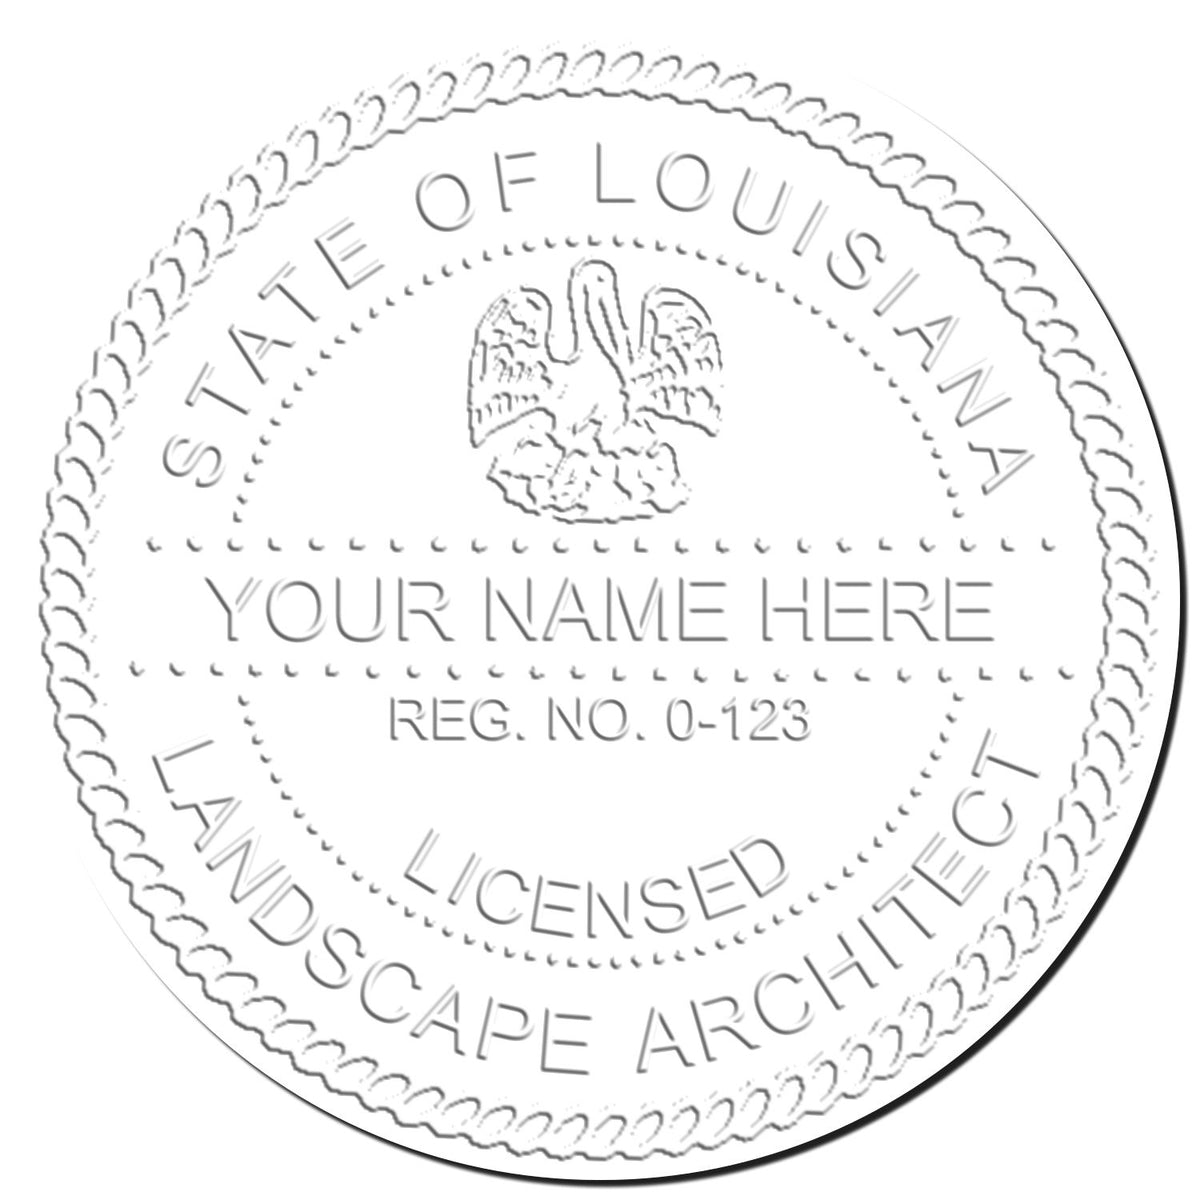 This paper is stamped with a sample imprint of the Soft Pocket Louisiana Landscape Architect Embosser, signifying its quality and reliability.